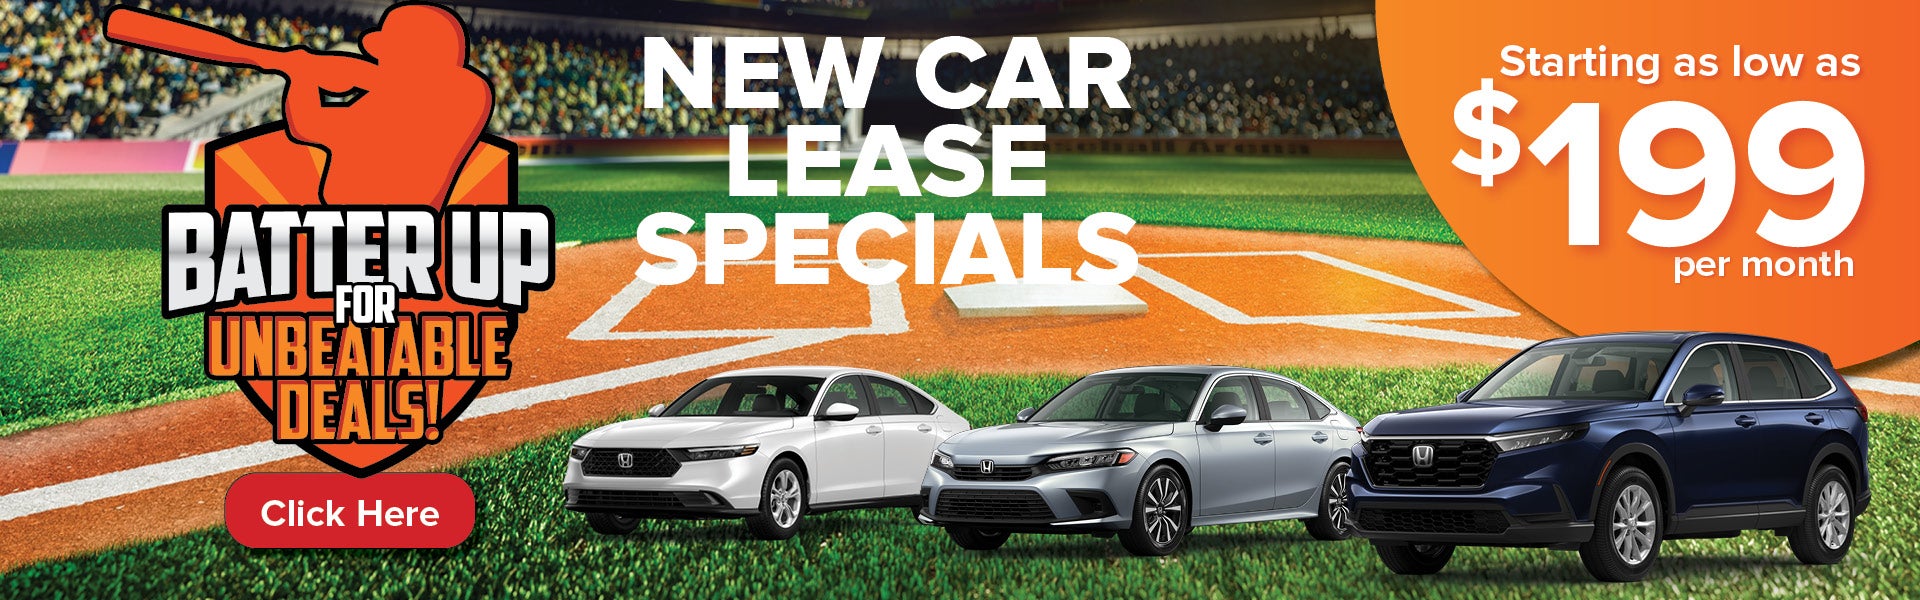 New Car Lease Specials Starting as low as $199 per month